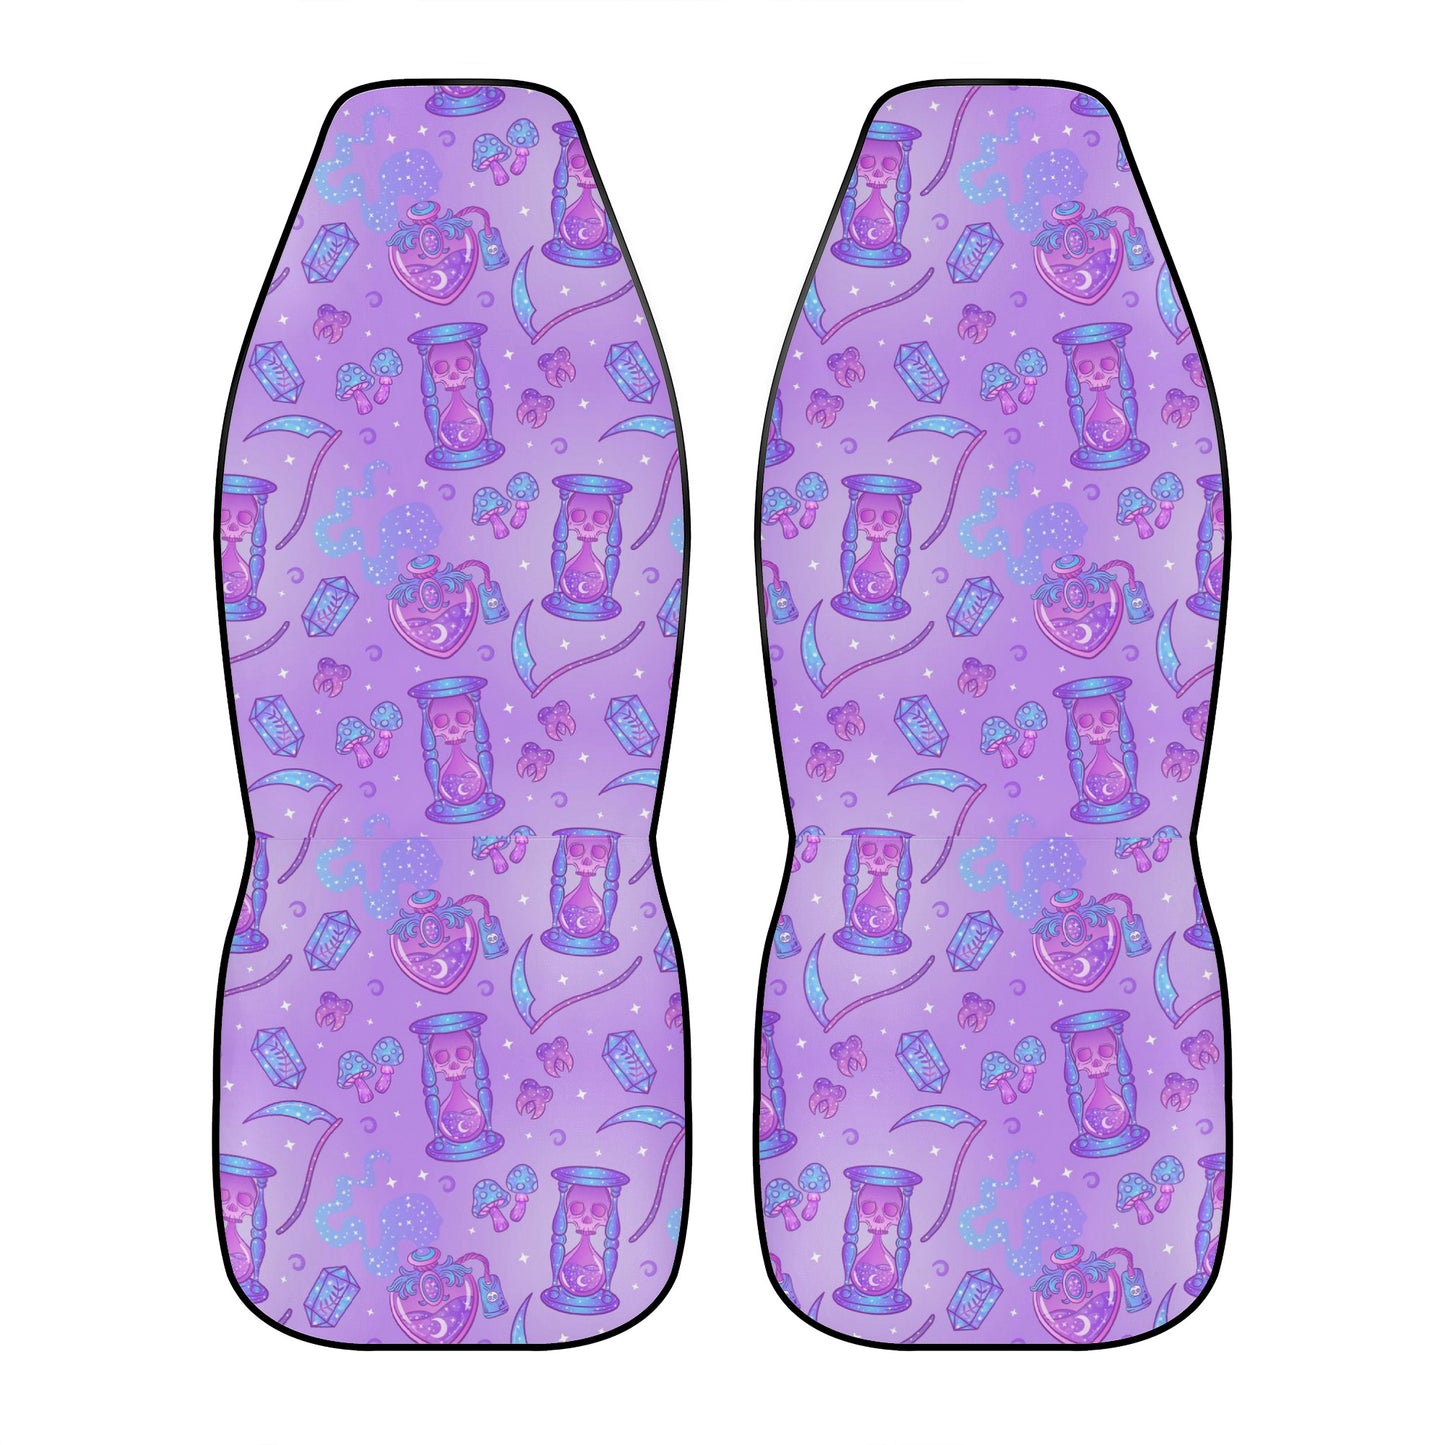 Pastel Witch Full Car Seat Cover Set